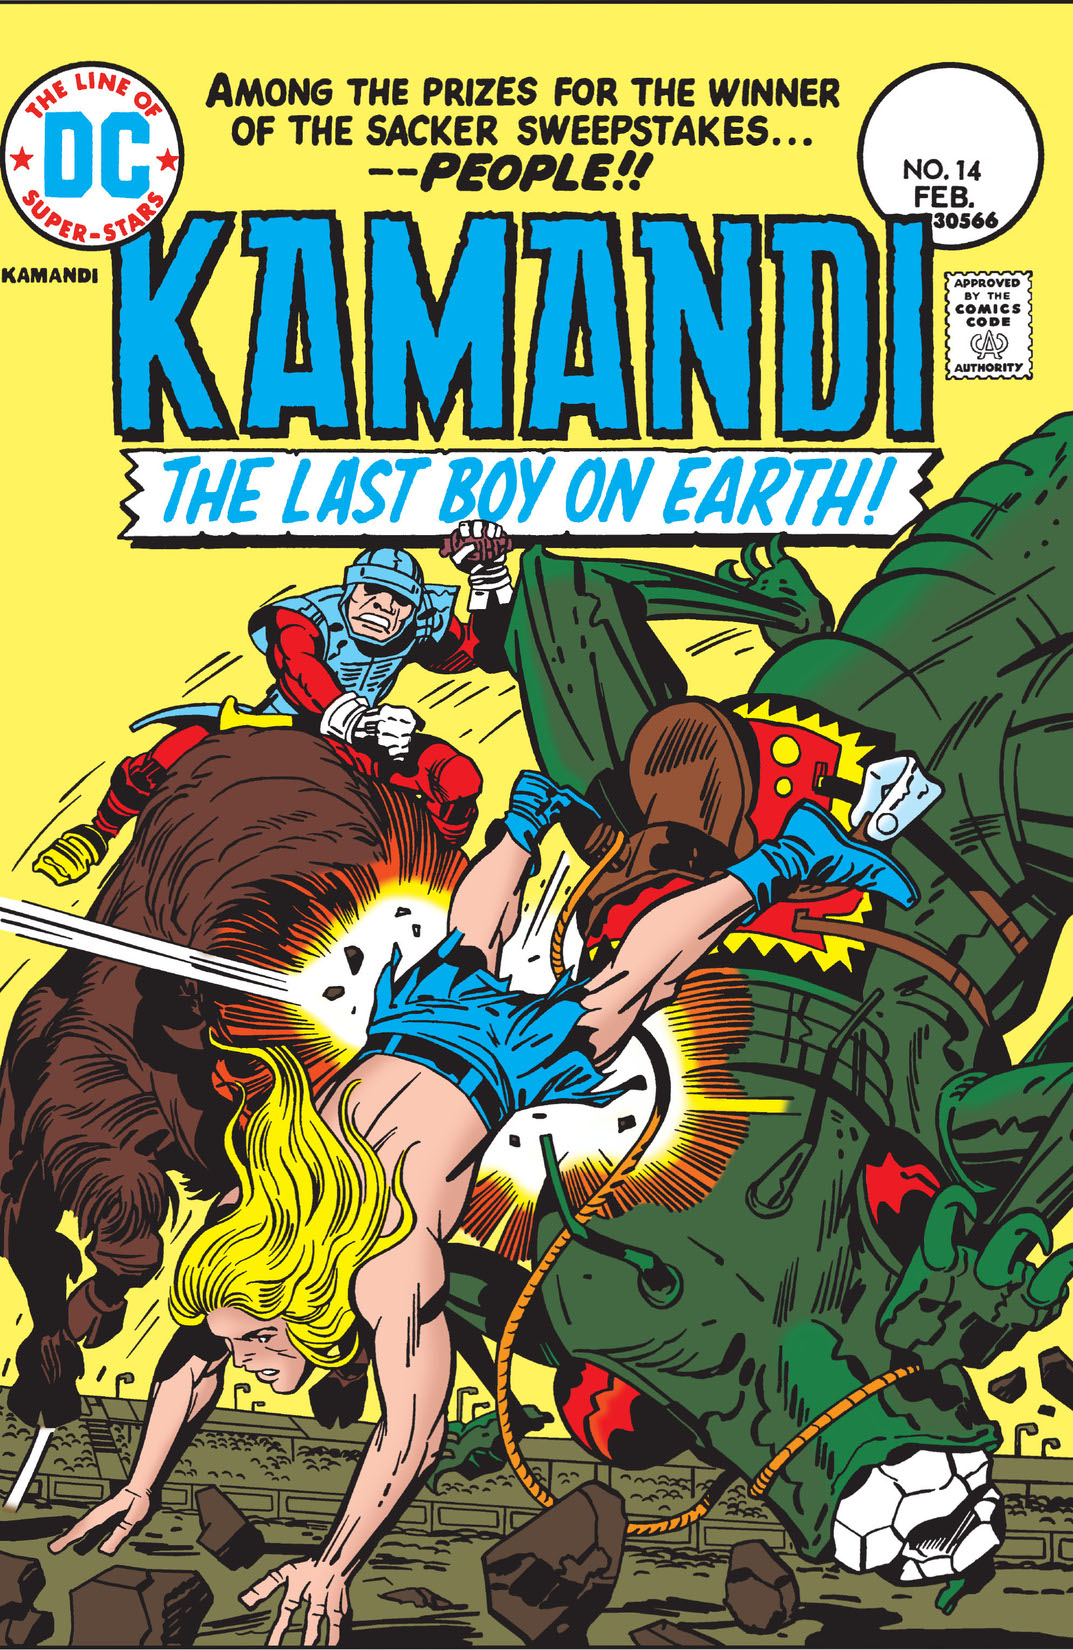 Kamandi: The Last Boy on Earth #14 preview images